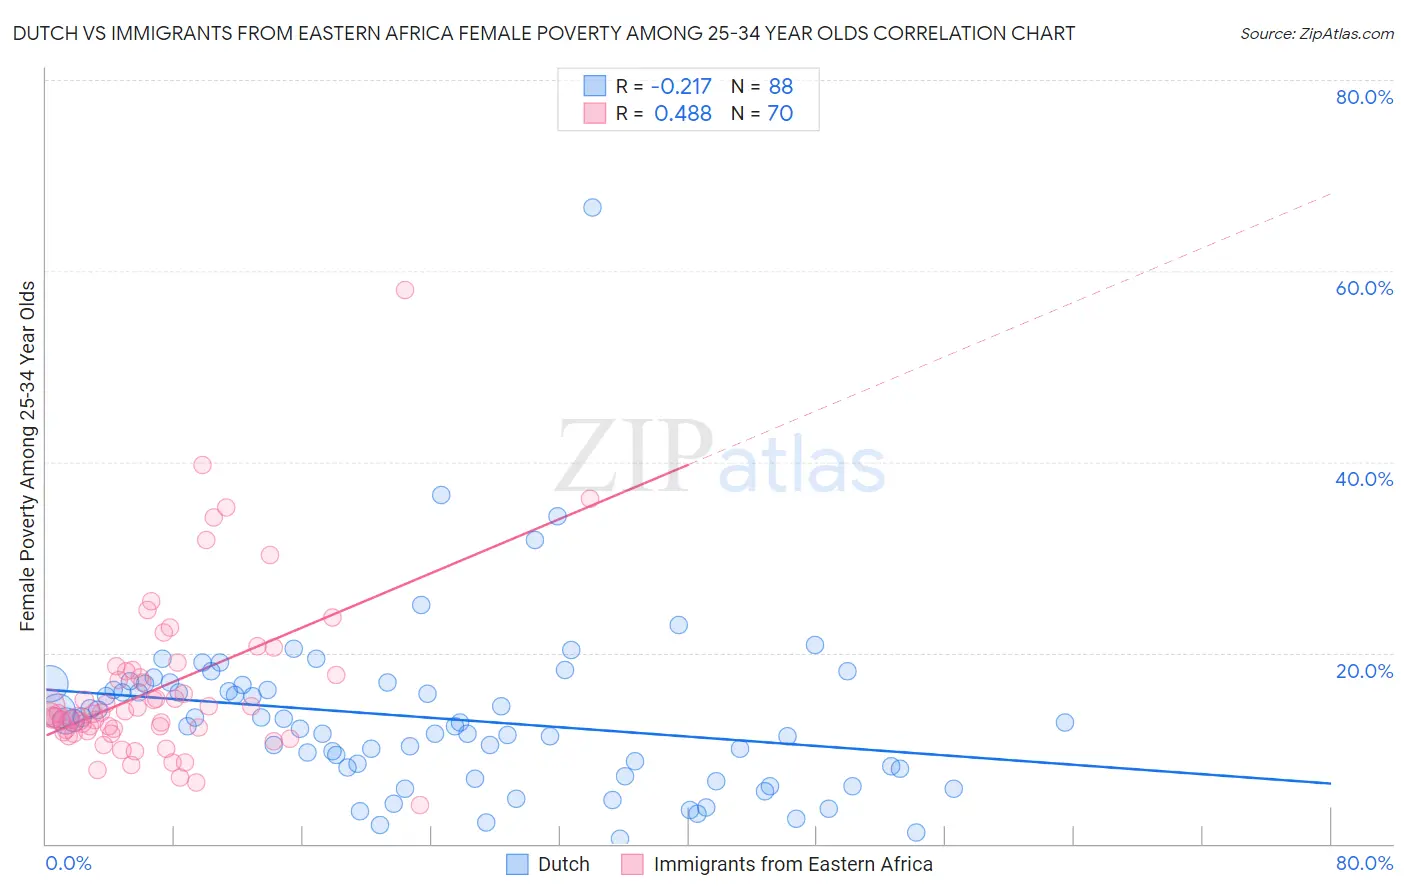 Dutch vs Immigrants from Eastern Africa Female Poverty Among 25-34 Year Olds